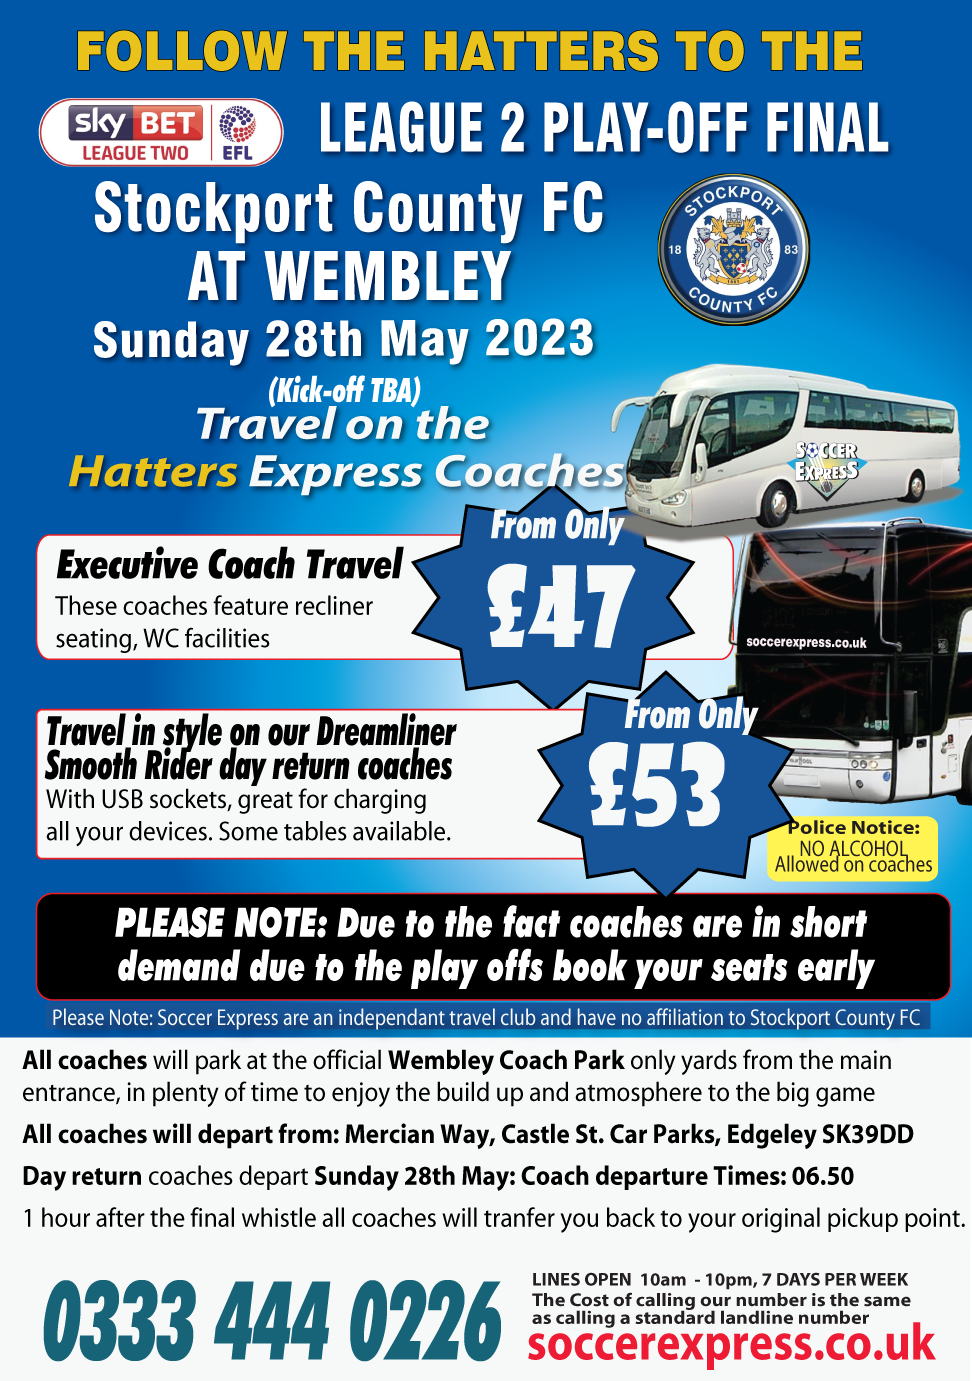 follow the to the Sky Bet League 2 Play-off Final. Stockport County FC at Wembley Sunday 28th May 2023  Kick of TBA, Fancy a trip to Wembley on our Hatters Express Coaches? Travel on our Executive coach travel Special offer only £47. Travel in style on our Smooth rider Dream liner coaches only £53  with USB sockets, great for charging all your devices.  Day returnscoaches depart Monay 29th May at 07.45am. from Mercian Way, Castle St. Car Parks, Edgeley SK39DD departs 07.45
 1 hour after the final whistle all coaches will transfer you back to your original pickup point. All coaches will park at the Official Wembley Coach Park in plenty of time to enjoy the build up to the Big Game. I hour after the final whistle all coaches will transfer you back to your original pickup point.
 0333 444 0226 LINES OPEN  10am  - 10pm, 7 DAYS PER WEEK. The Cost of calling our number is the same. as calling a standard landline number . 
<div class=